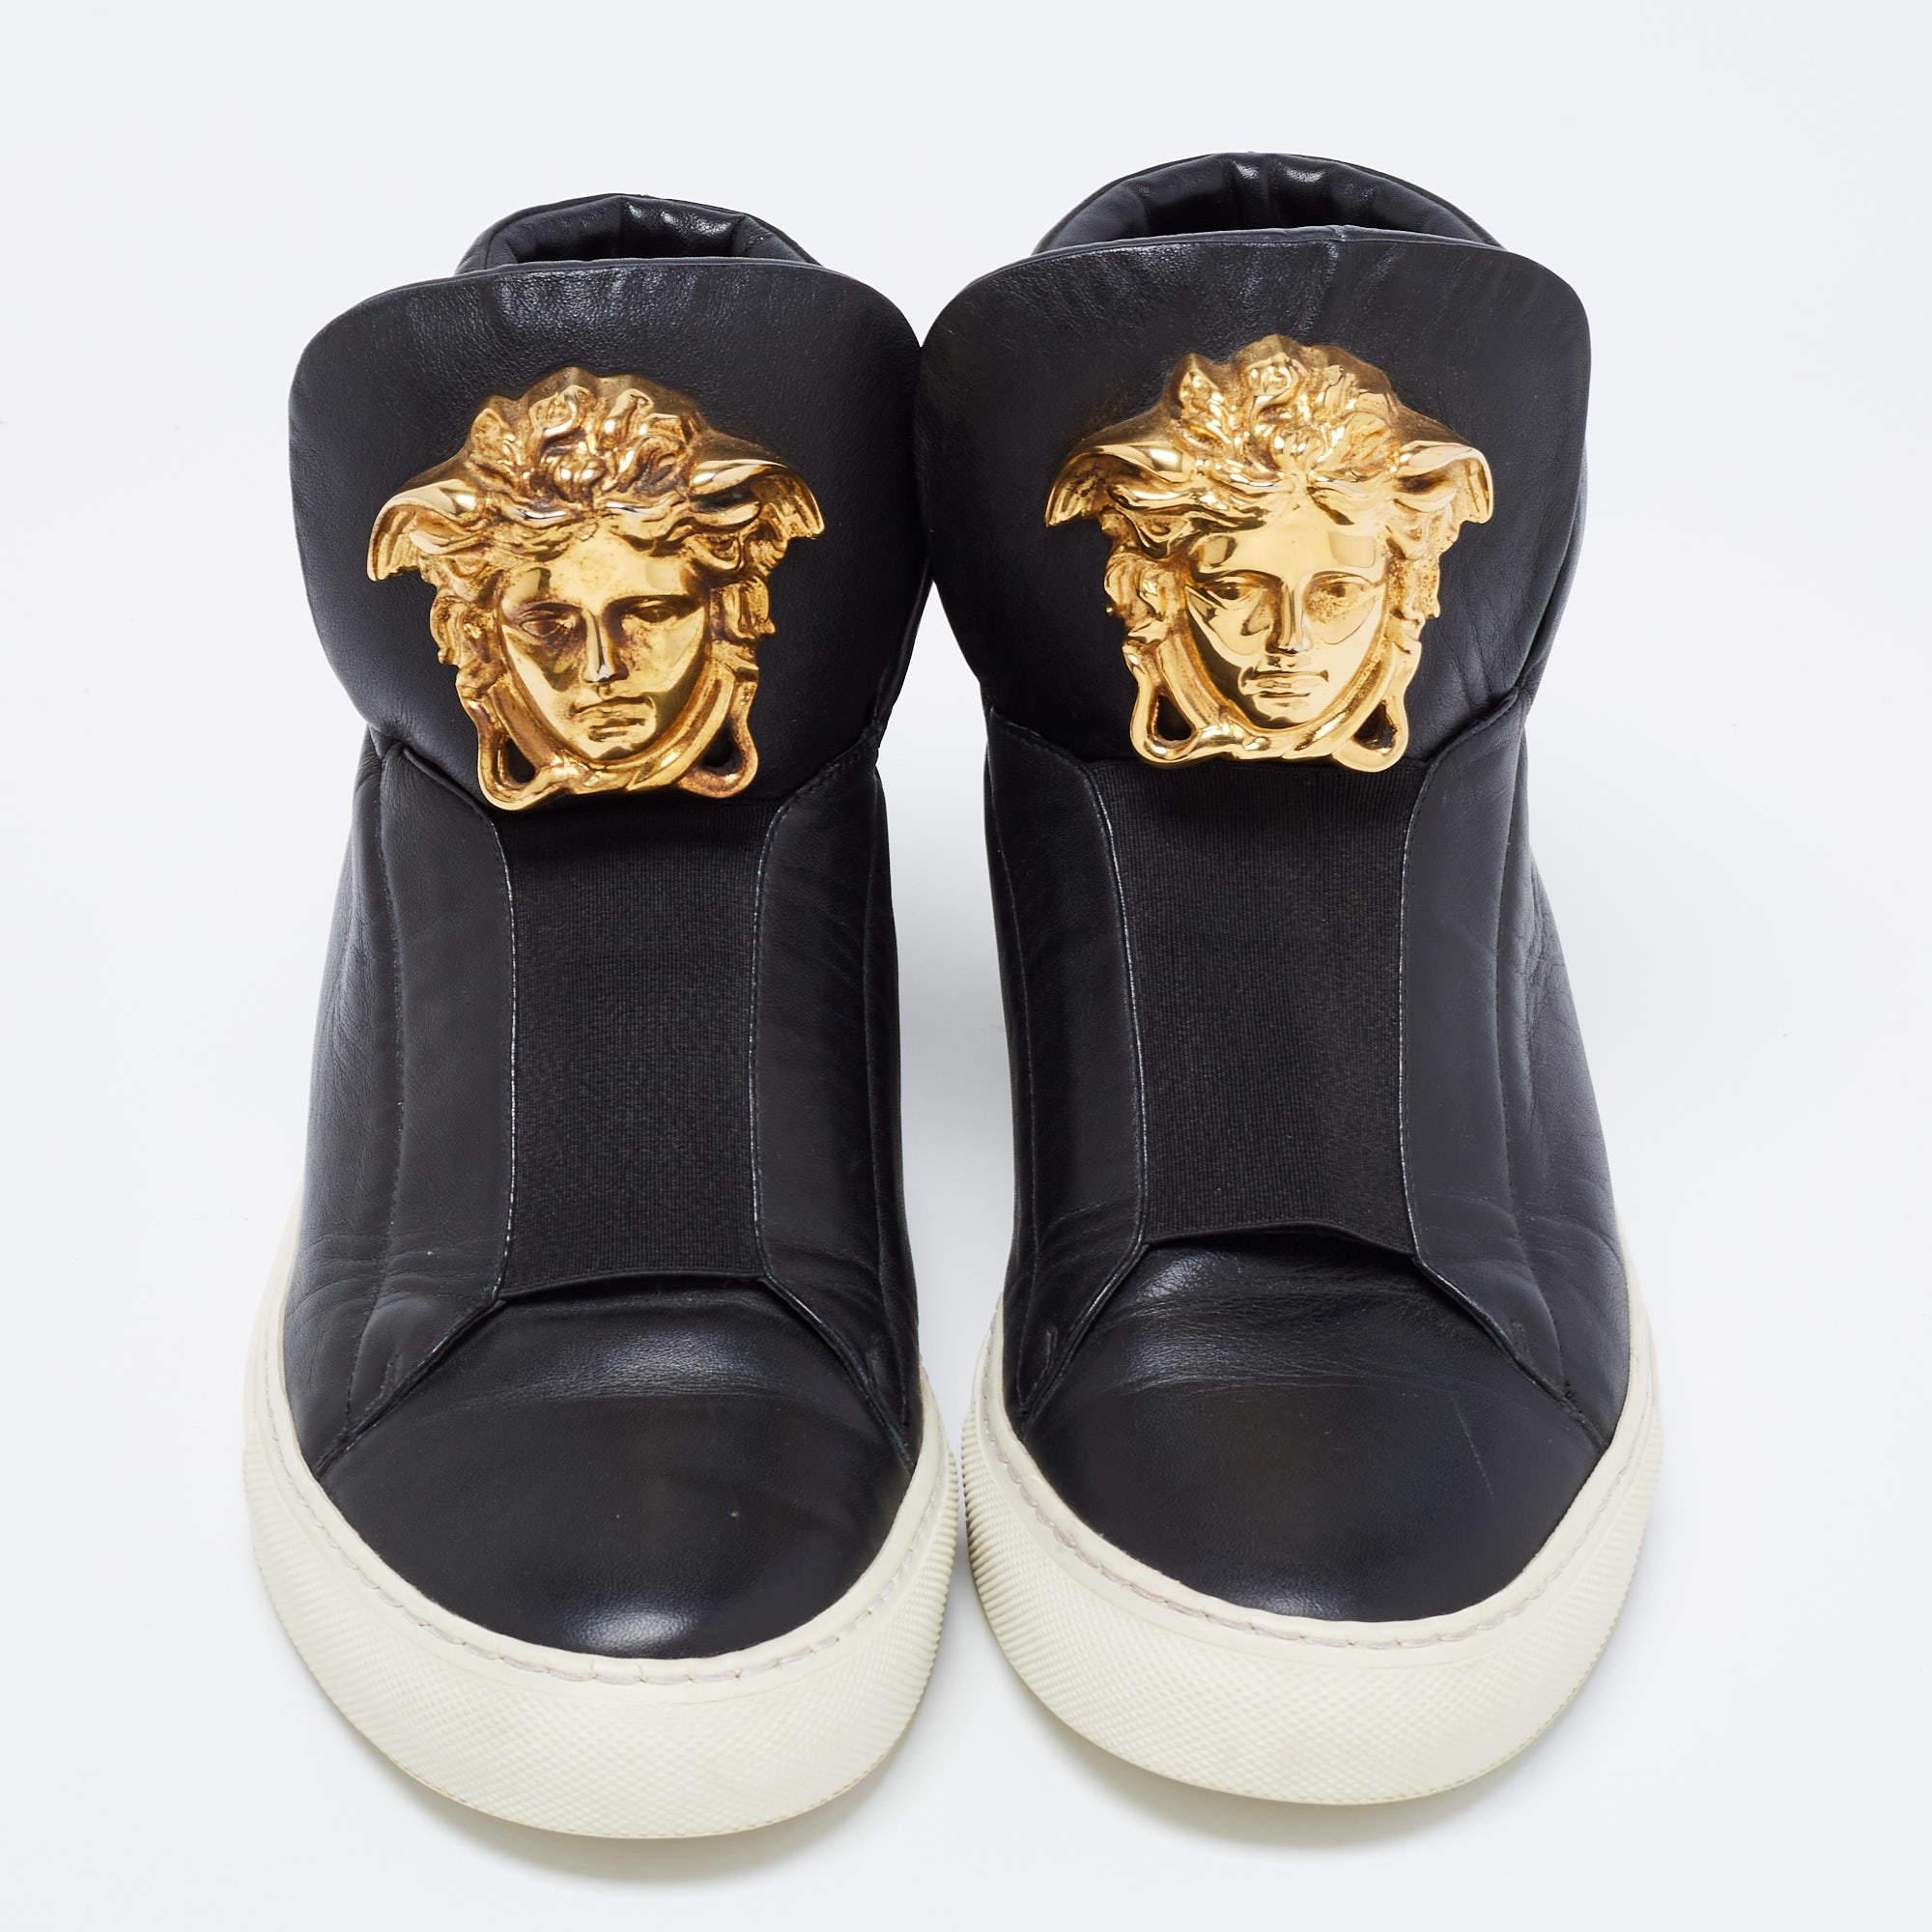 Sneakers are sought-after for reasons like comfort, ease, and casual style. These Versace ones fit right in as they are stylish and snug. They come crafted from black leather into a design of elastic panels and the Medusa logo on the front.

